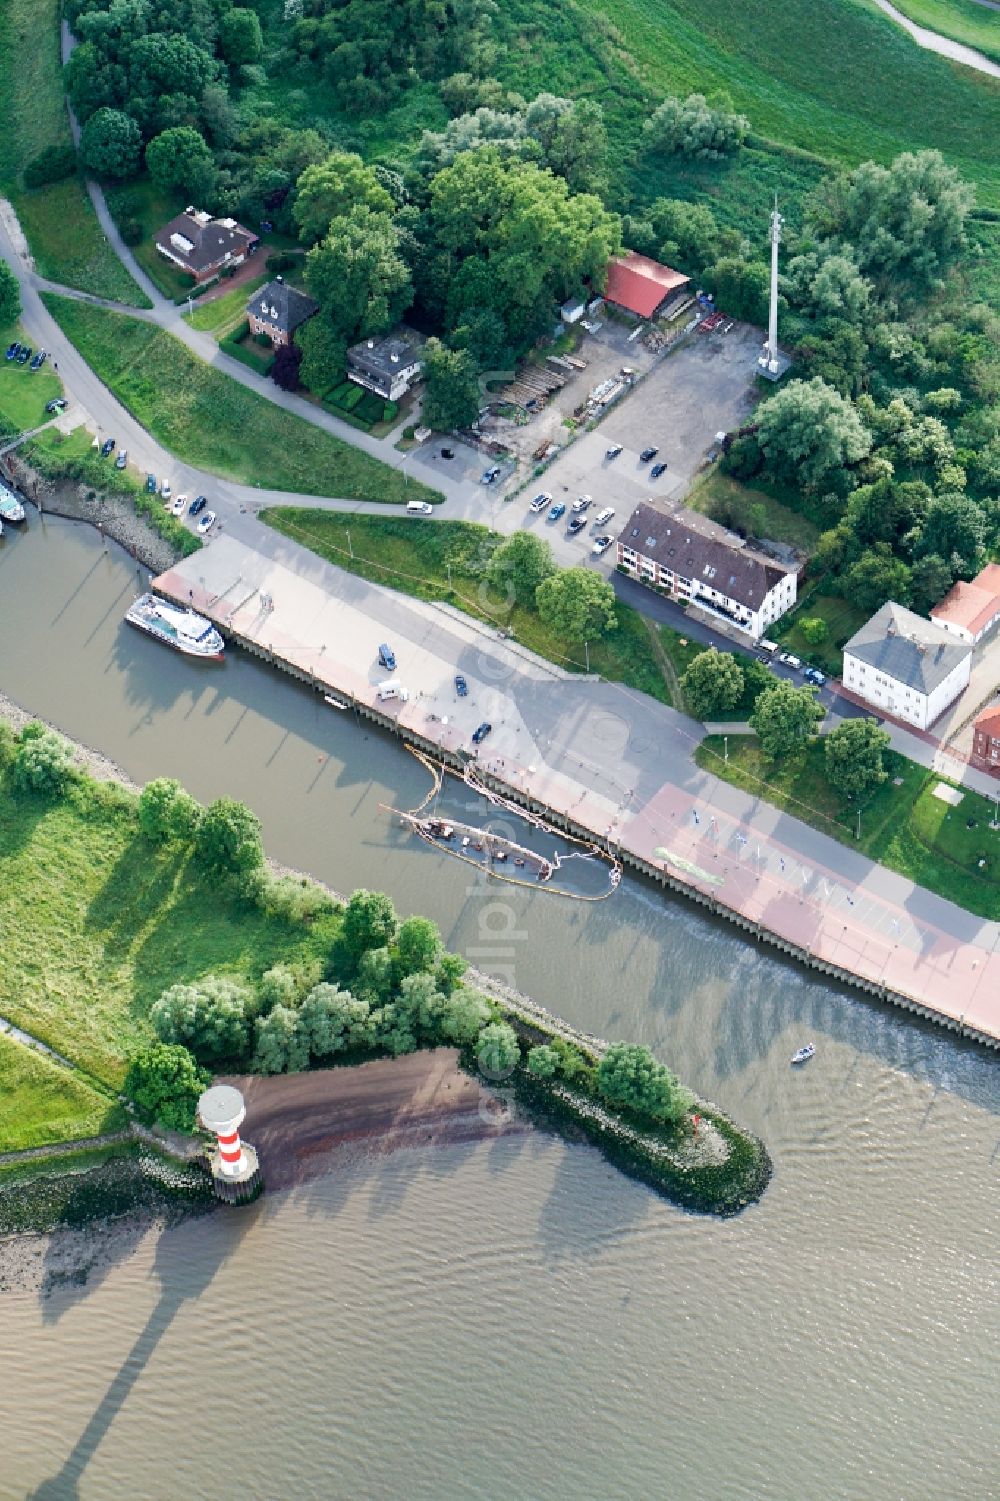 Stade from the bird's eye view: Salvage processing on ship - wreck of the historic two-master, the sunken pilot schooner No 5 Elbe in Stade in the state Lower Saxony, Germany